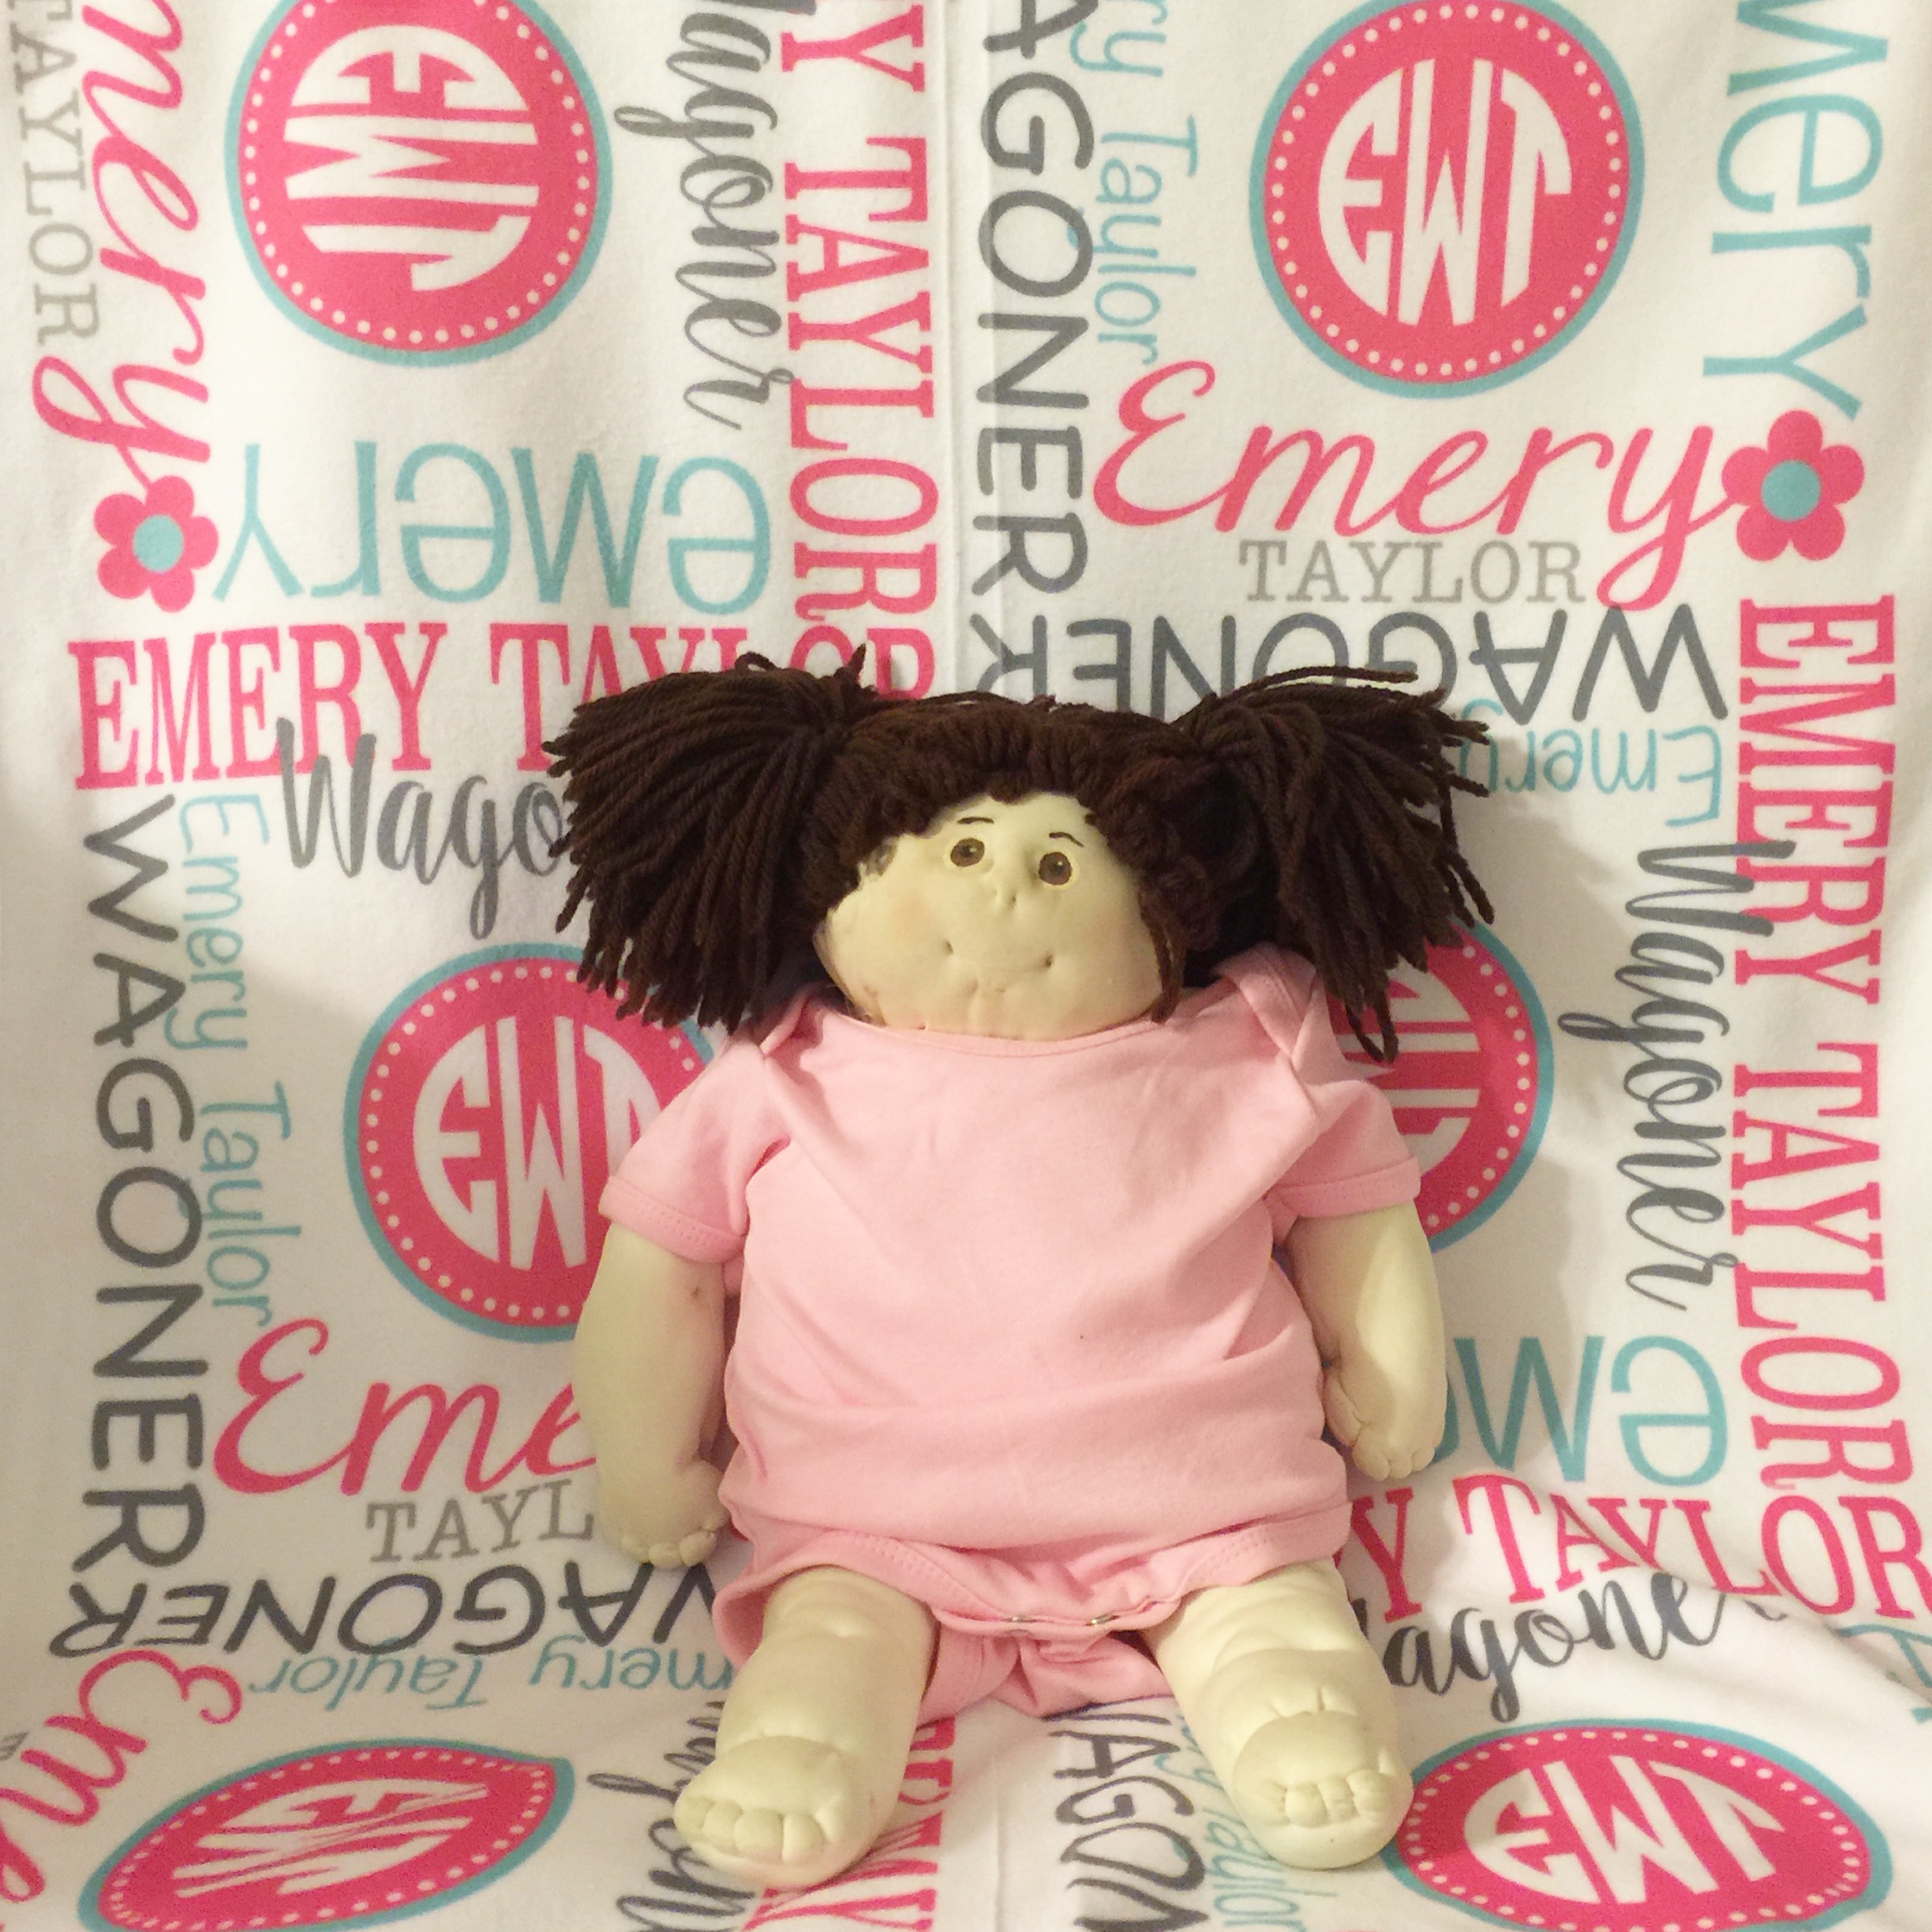 Personalized Baby Blankets made with sublimation printing